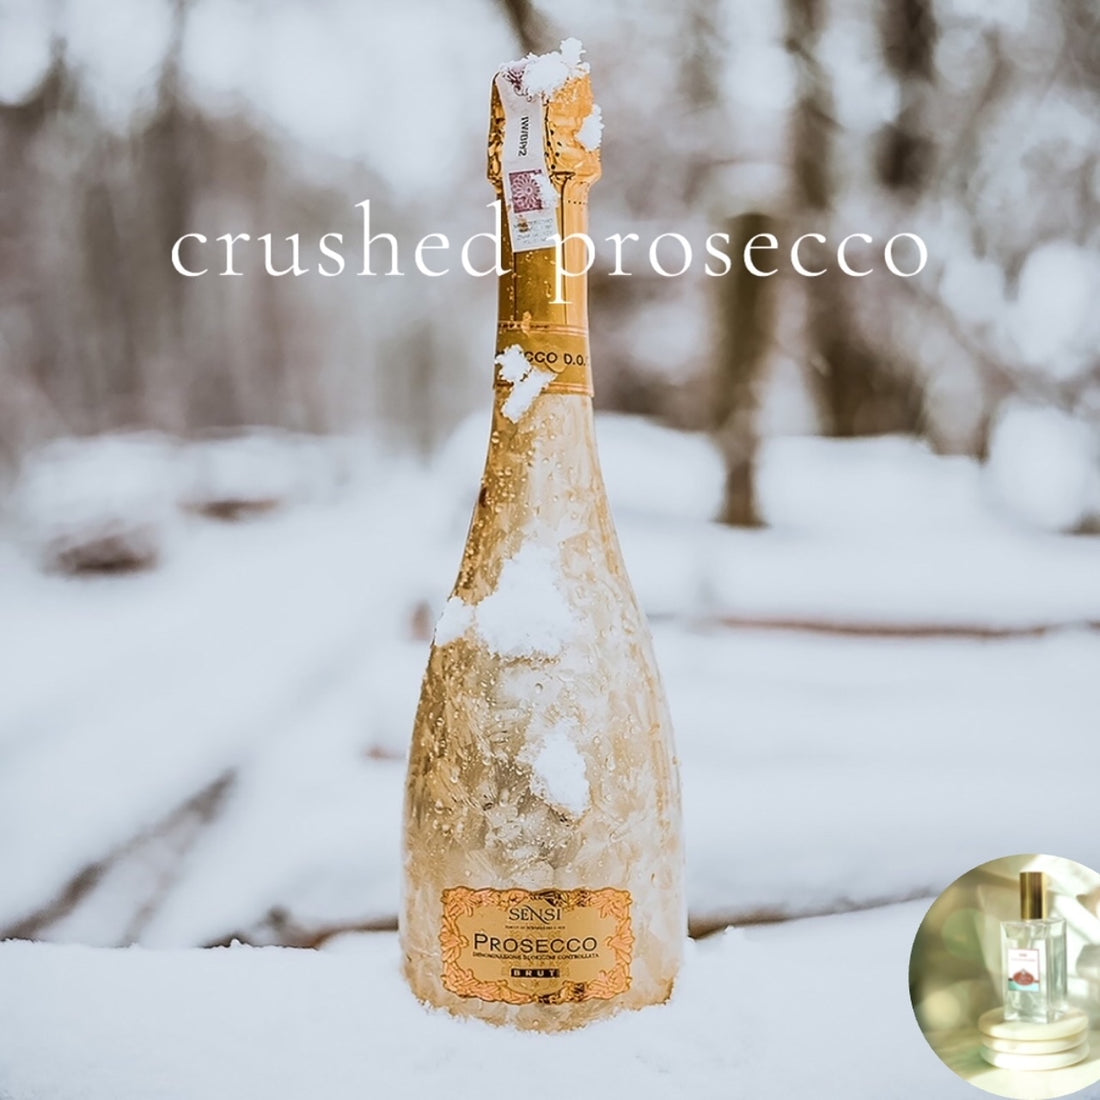 CRUSHED PROSECCO scented Room and Body Spray - Buy 2 Get 2 for 50% off deal